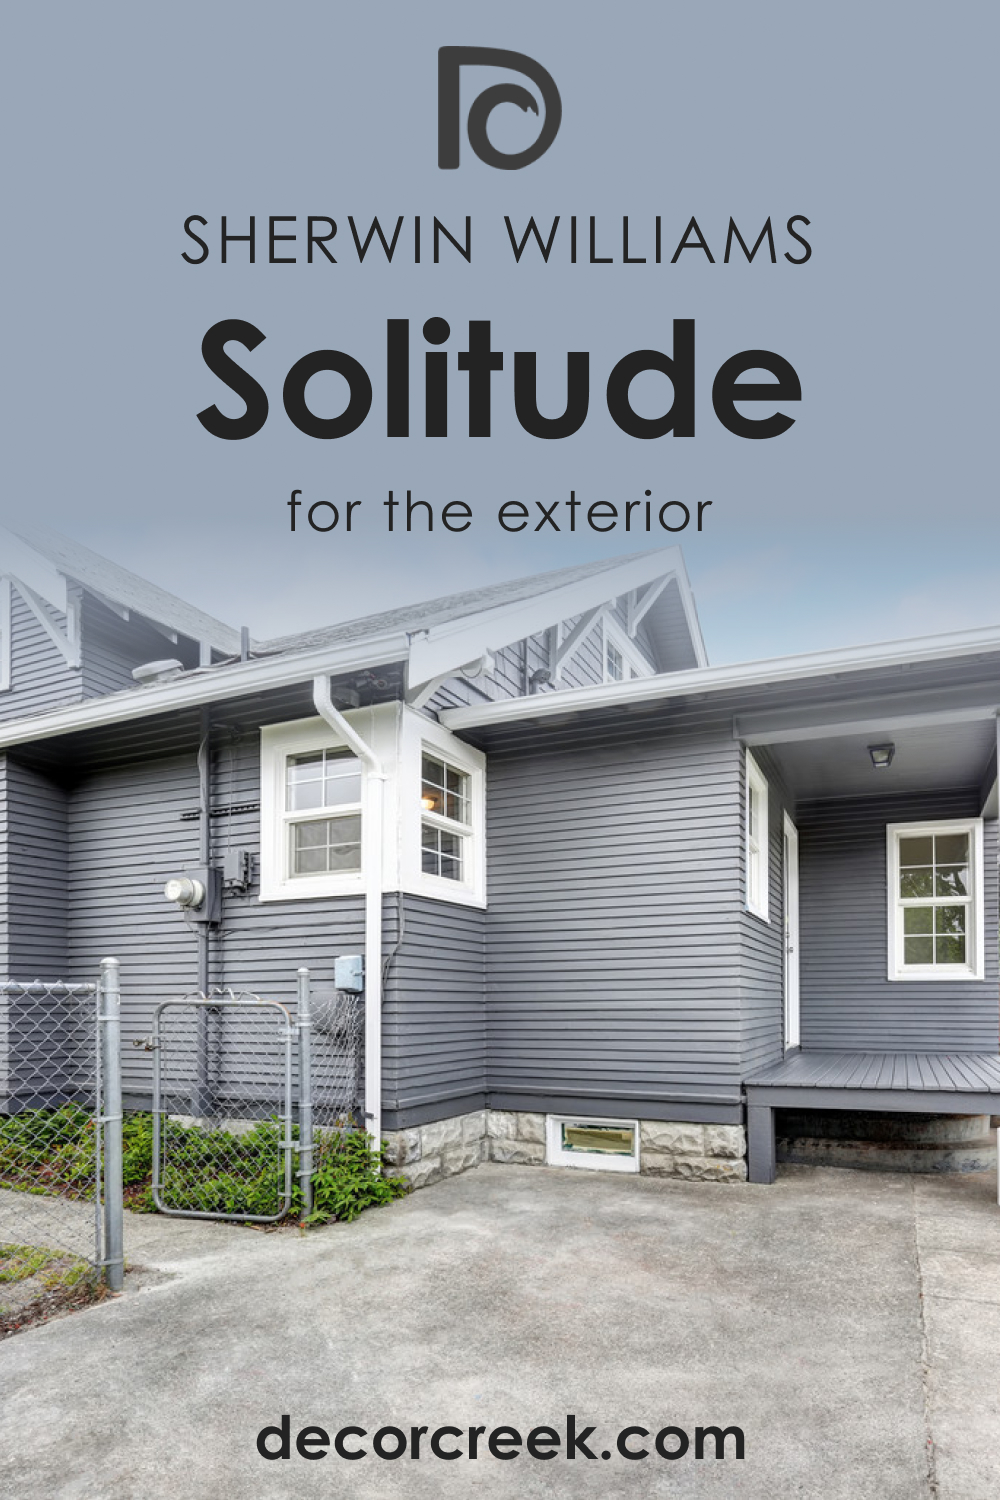 How to Use SW 6535 Solitude for an Exterior?